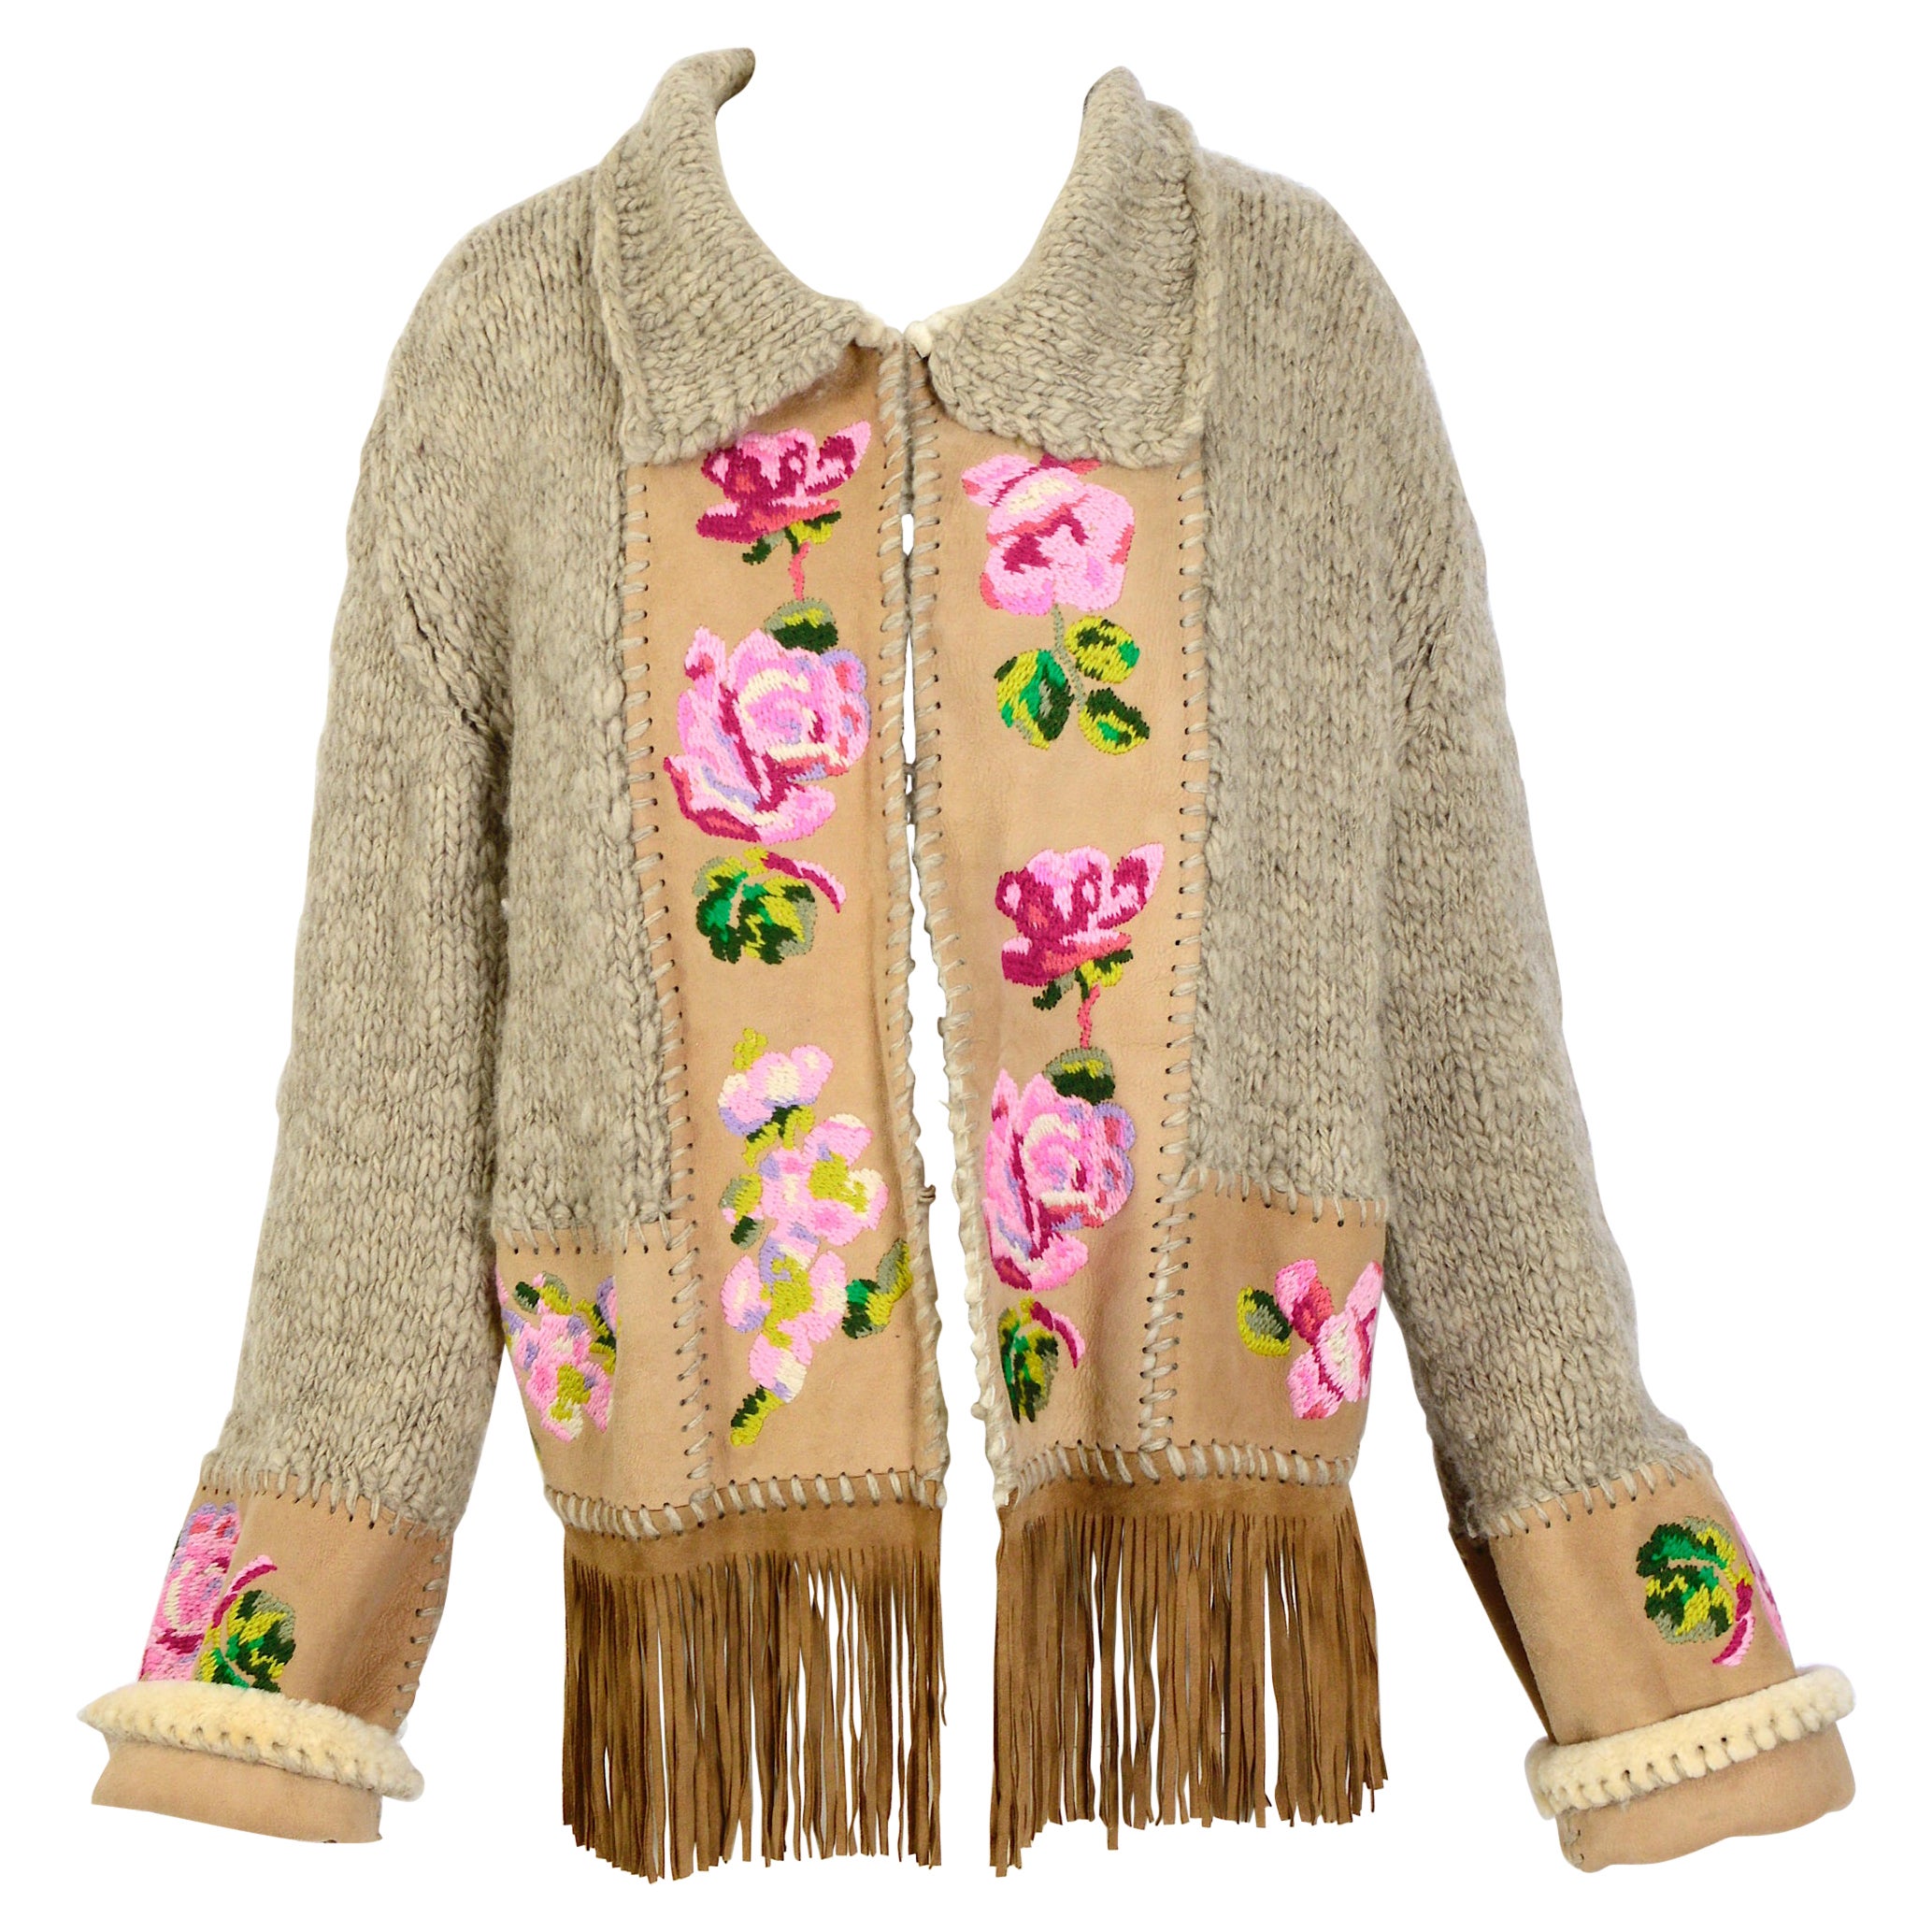 Christian Dior by John Galliano vintage fall 2000 embroidered fringed cardigan  